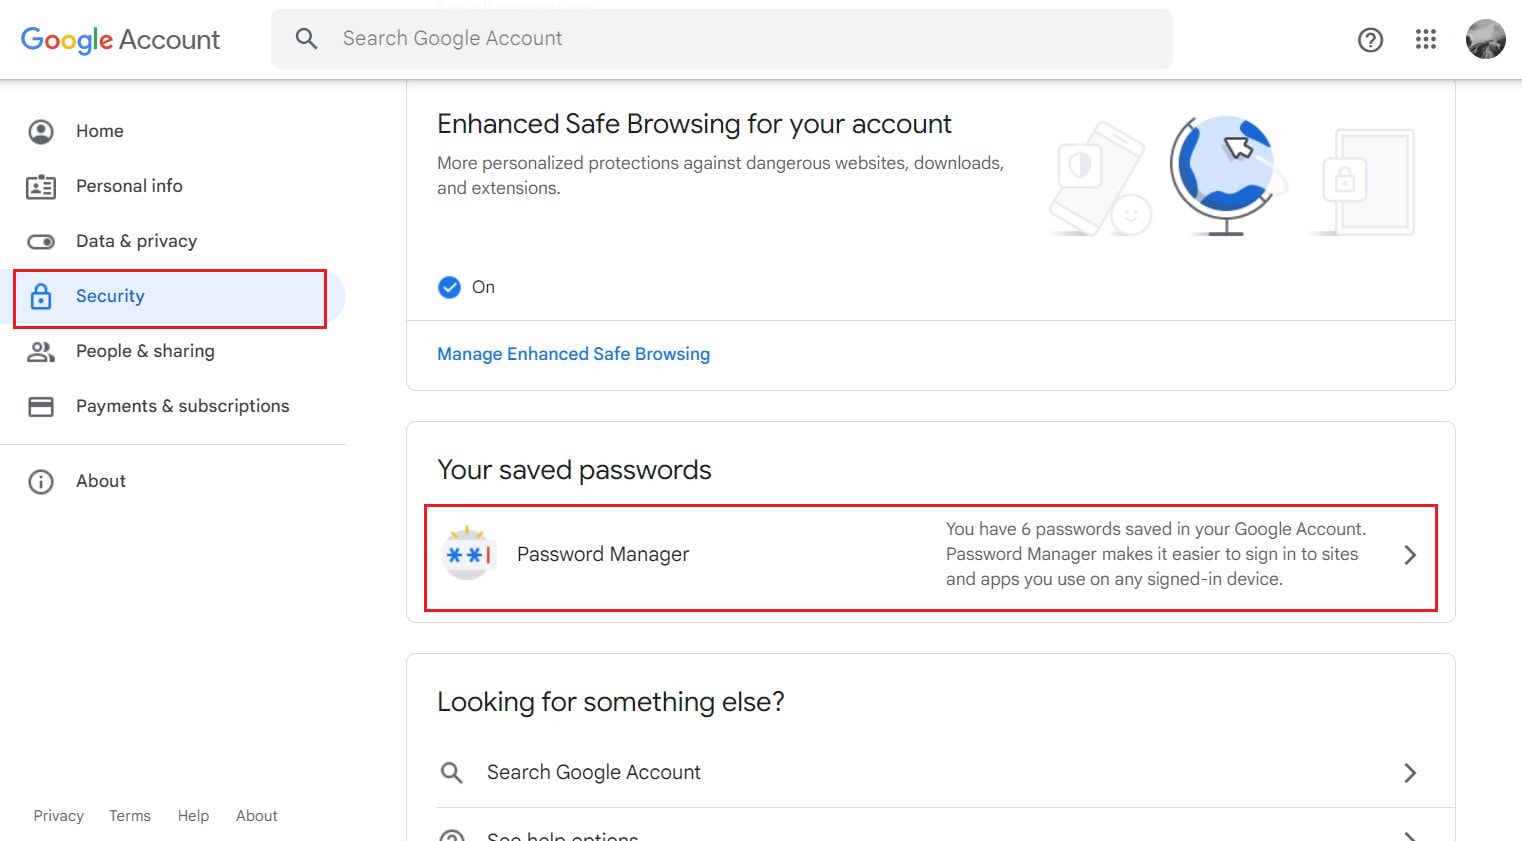 click on the Security option from the left pane - scroll down and click on Password Manager